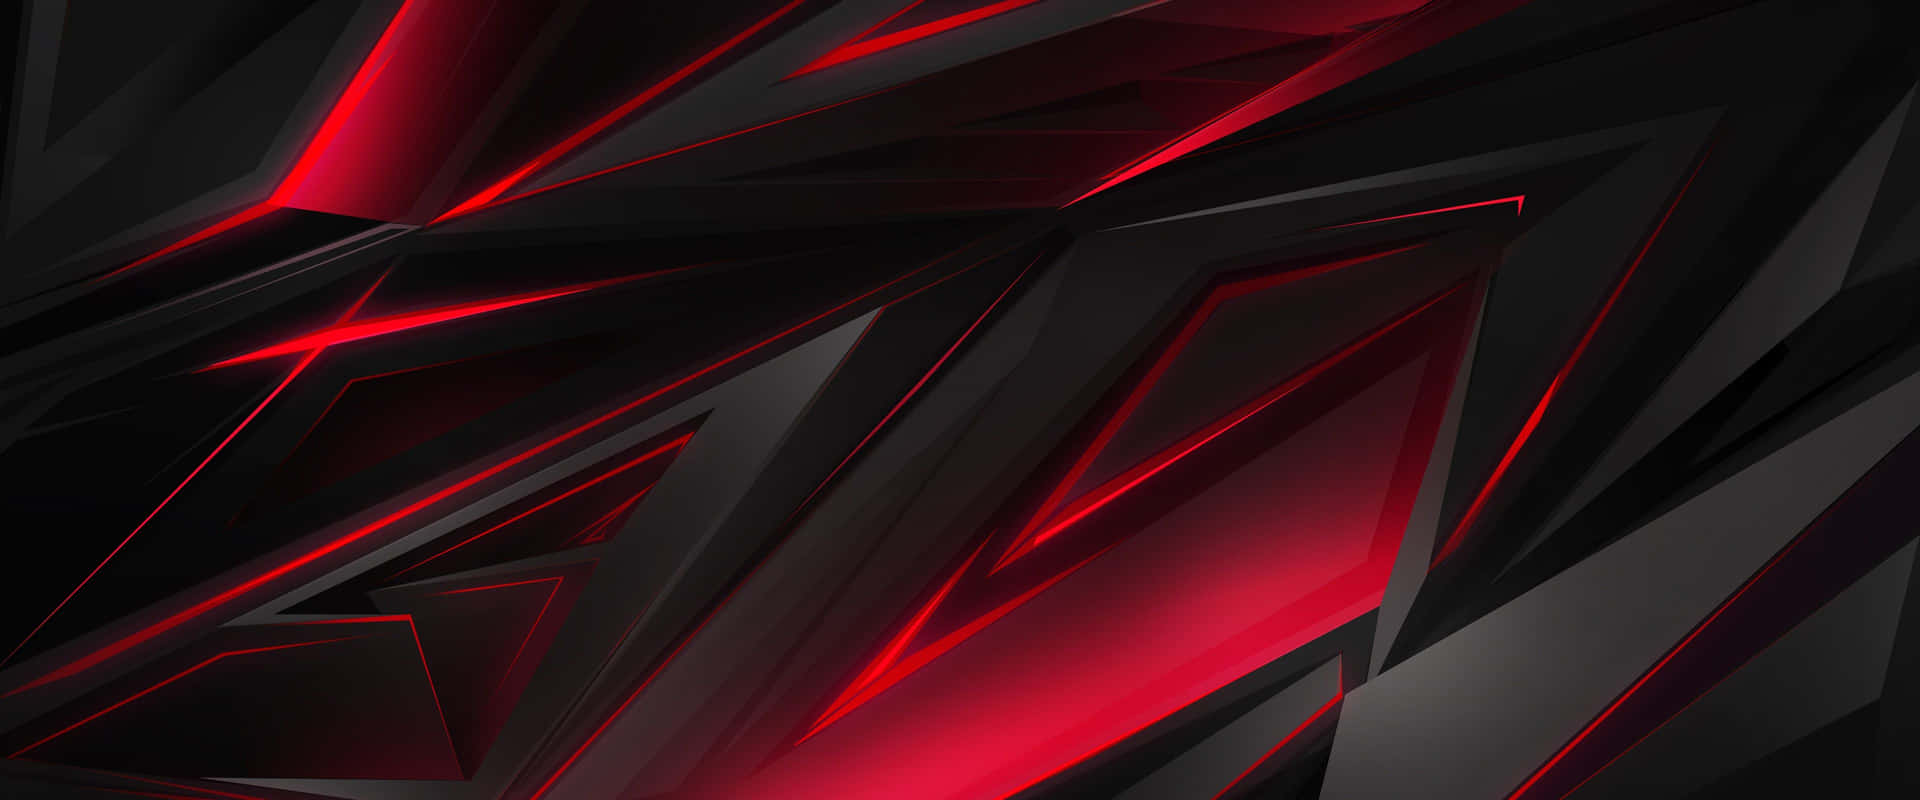 Abstract Geometric Shapes Red Ultra Wide HD Wallpaper